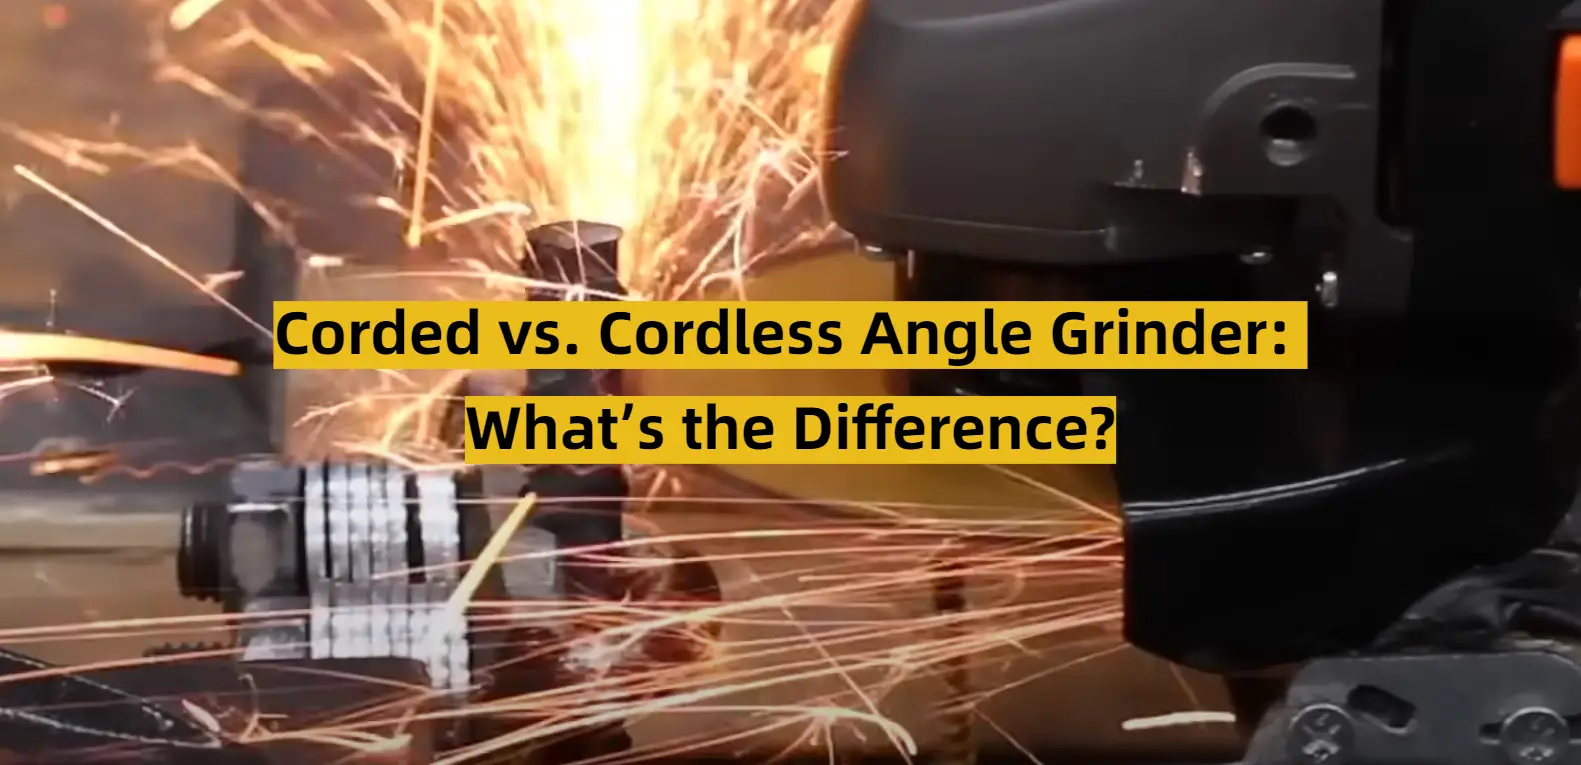 Corded vs. Cordless Angle Grinder: What’s the Difference?